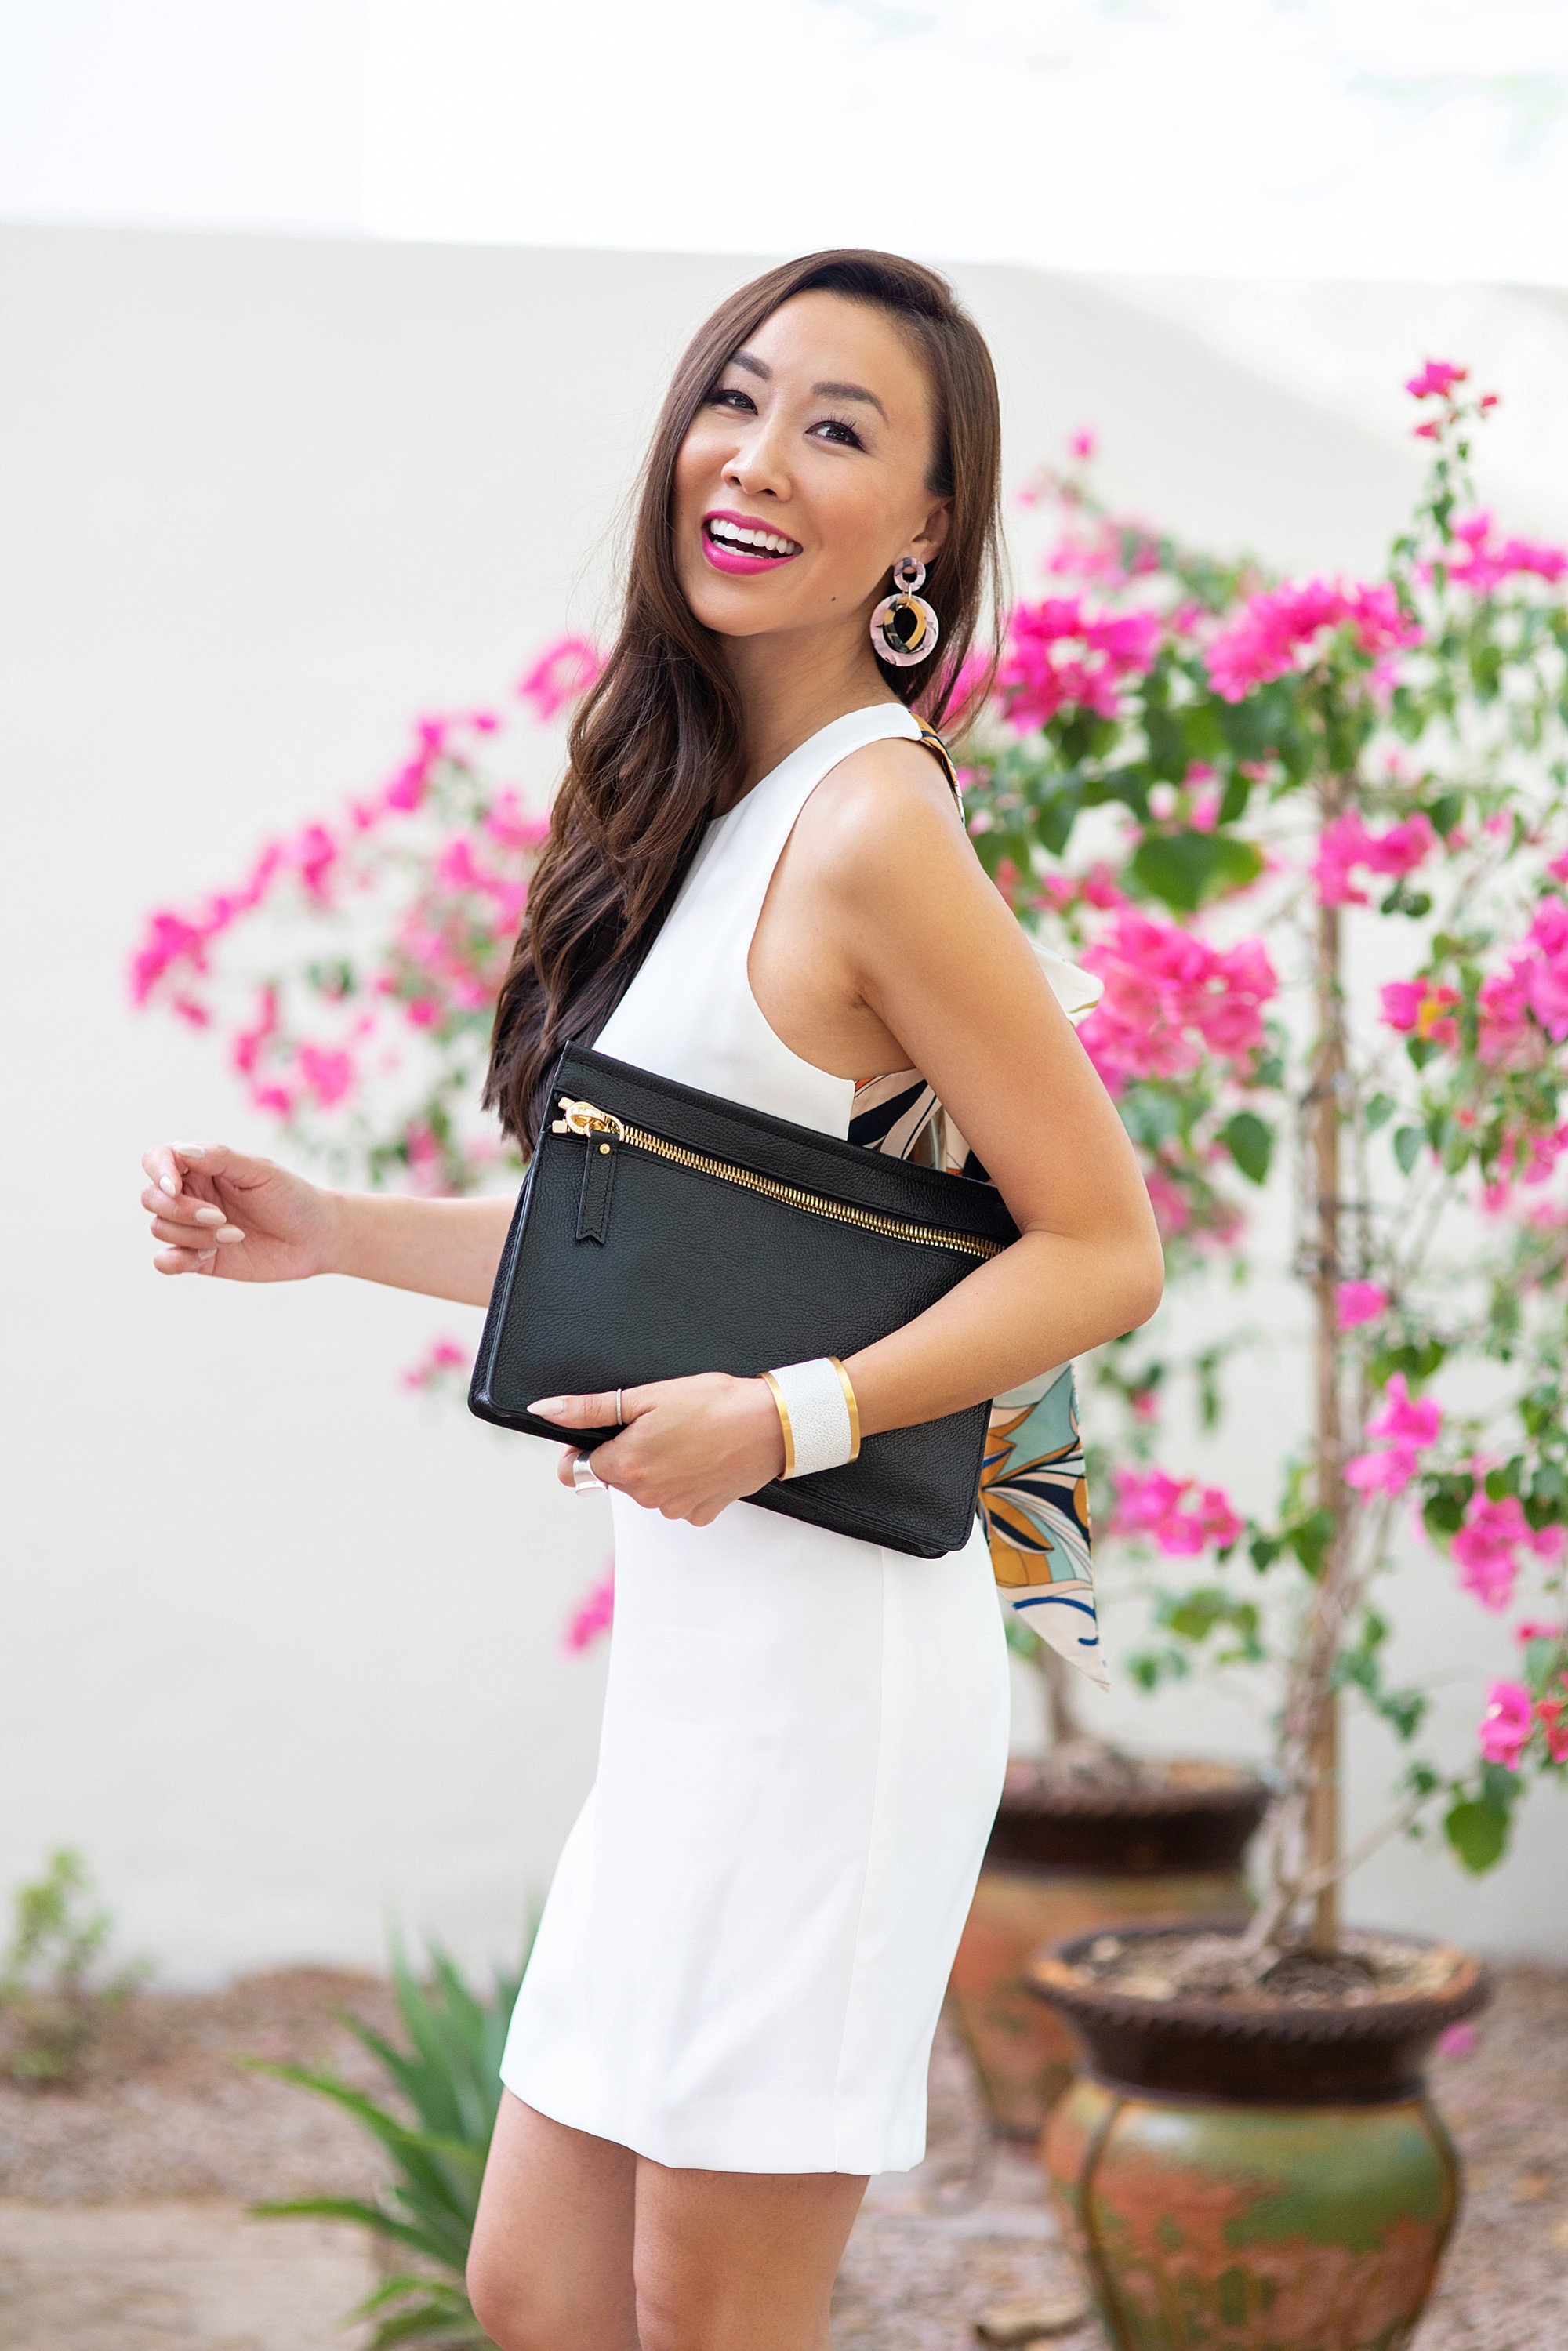 Mango Gugi2 scarf dress on blogger Diana Elizabeth in Phoenix, Arizona. Scarf dress paired a black clutch by India Hicks and white leather brass cuff and tortoise acrylic hoops